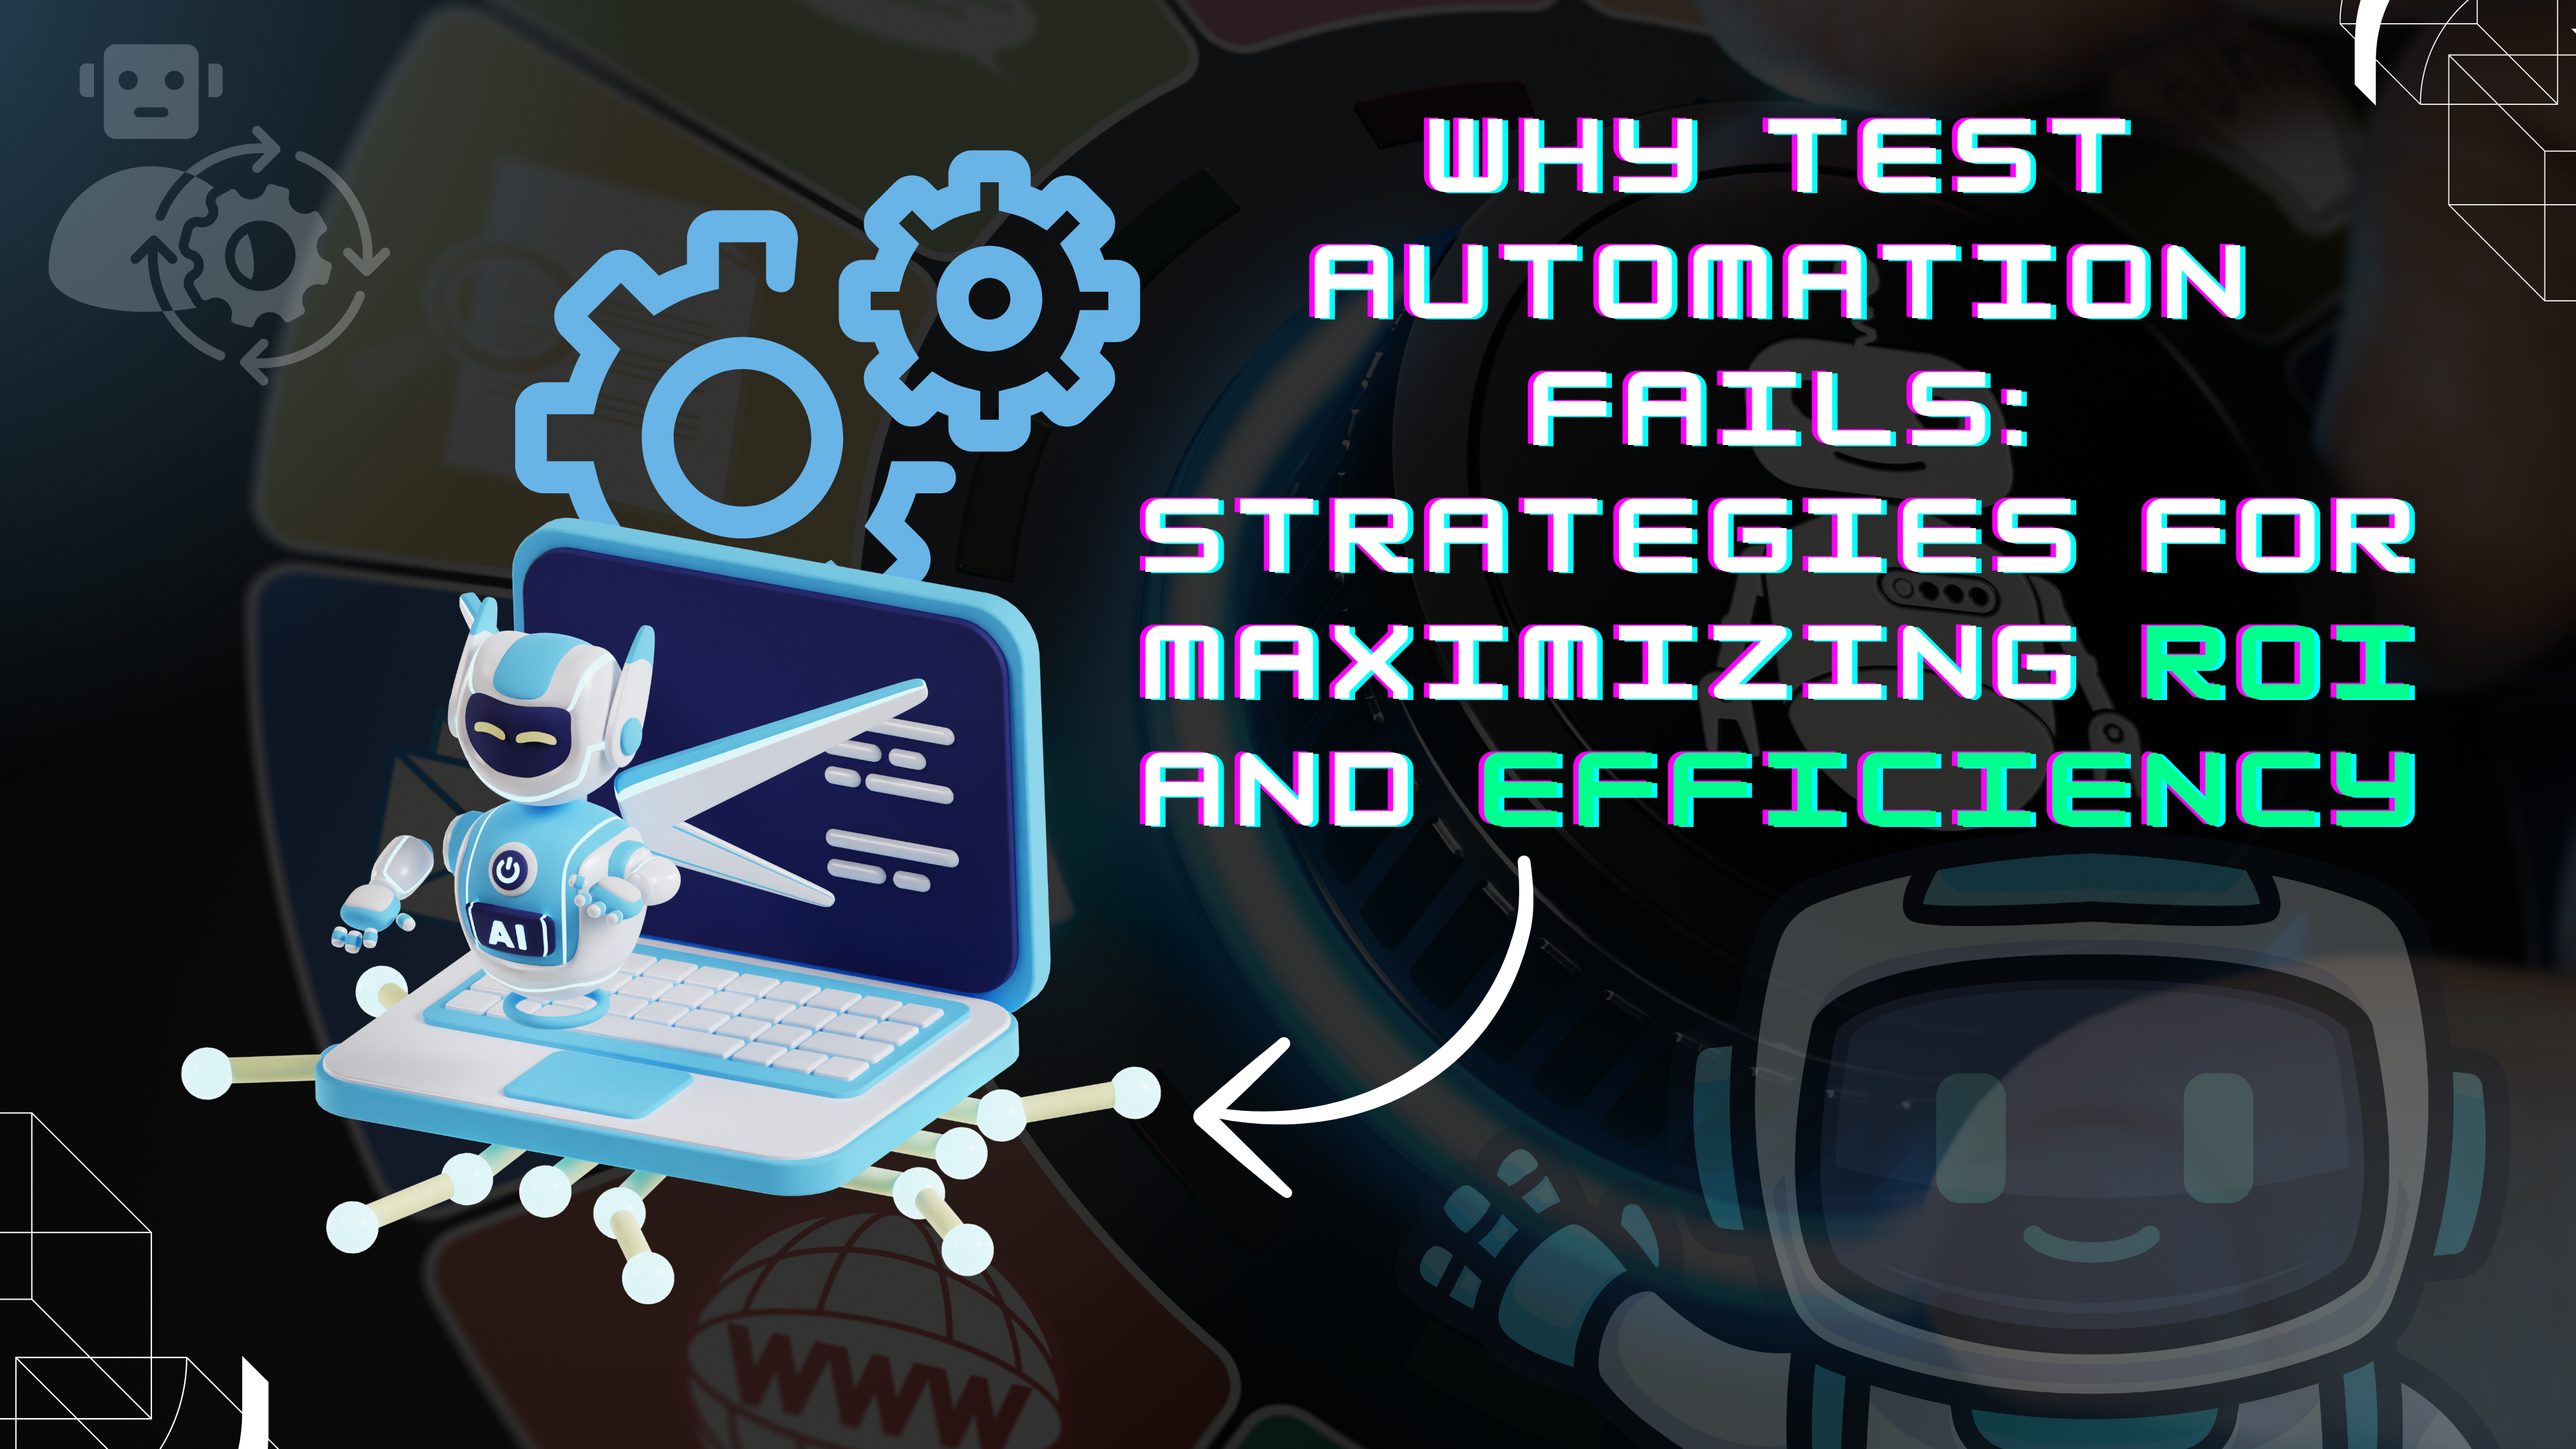 Why Test Automation Fails: Strategies for Maximizing ROI and Efficiency